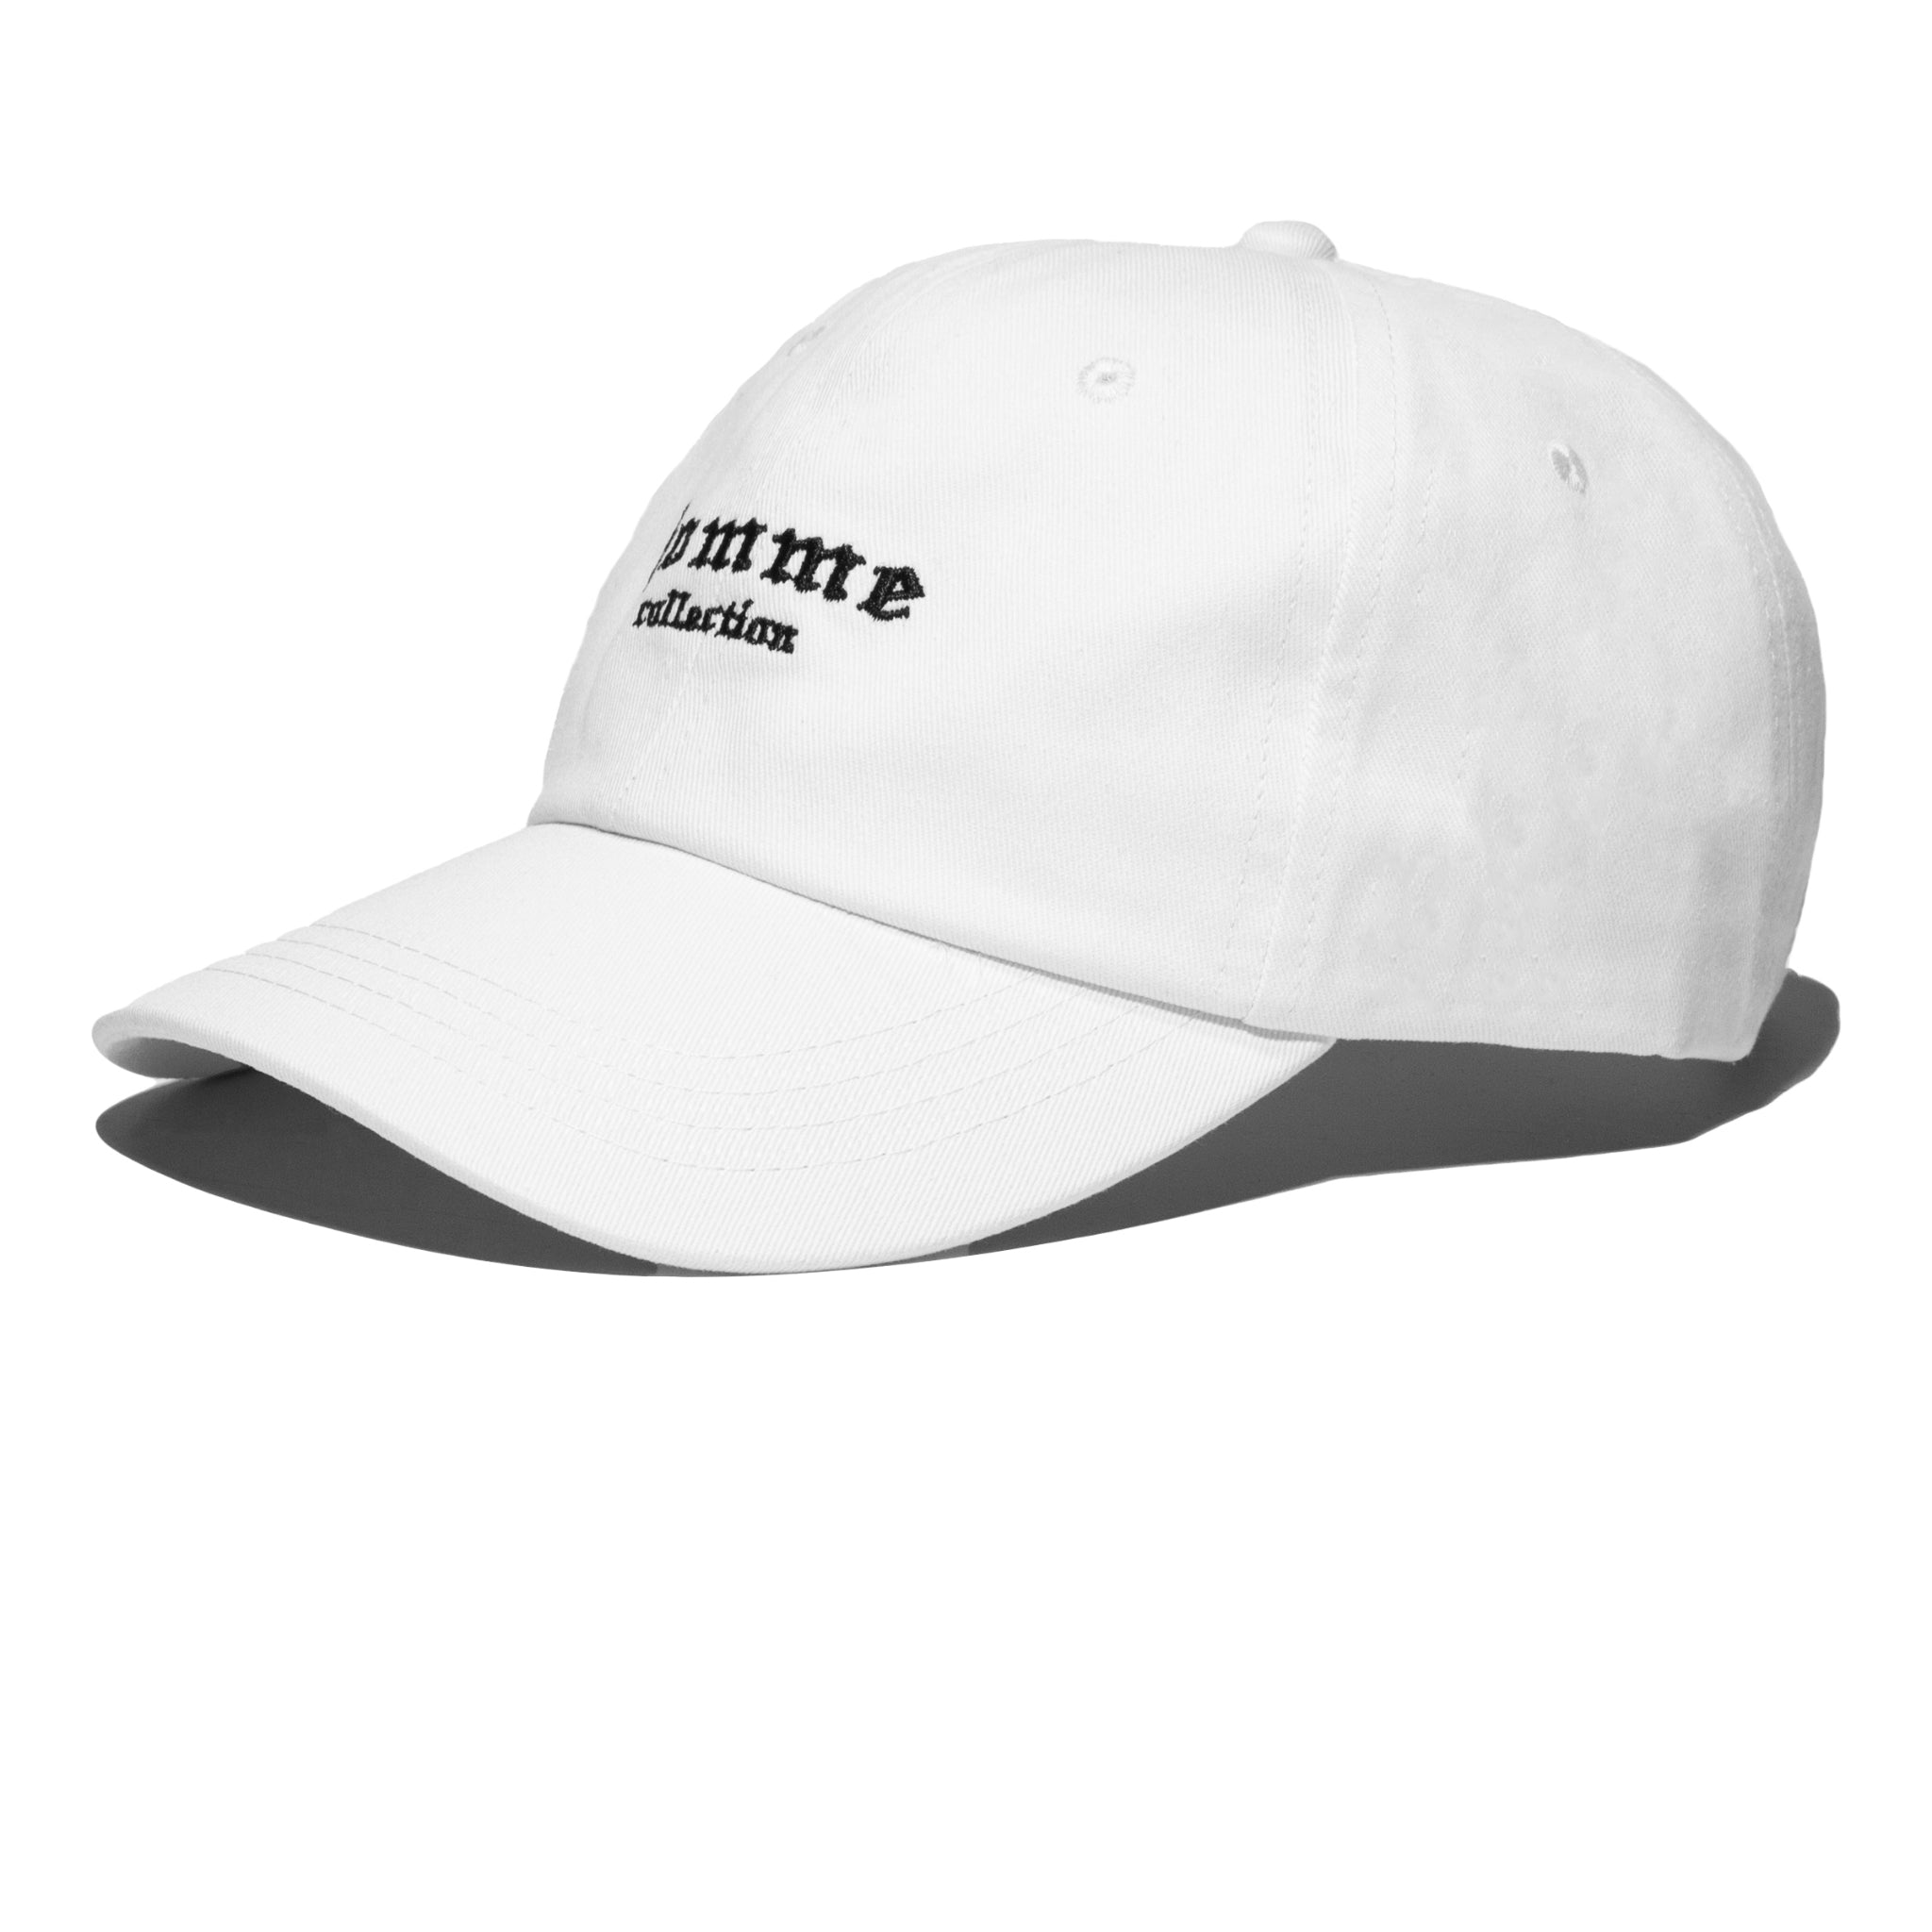 HOMME+ Embroidered Cap White